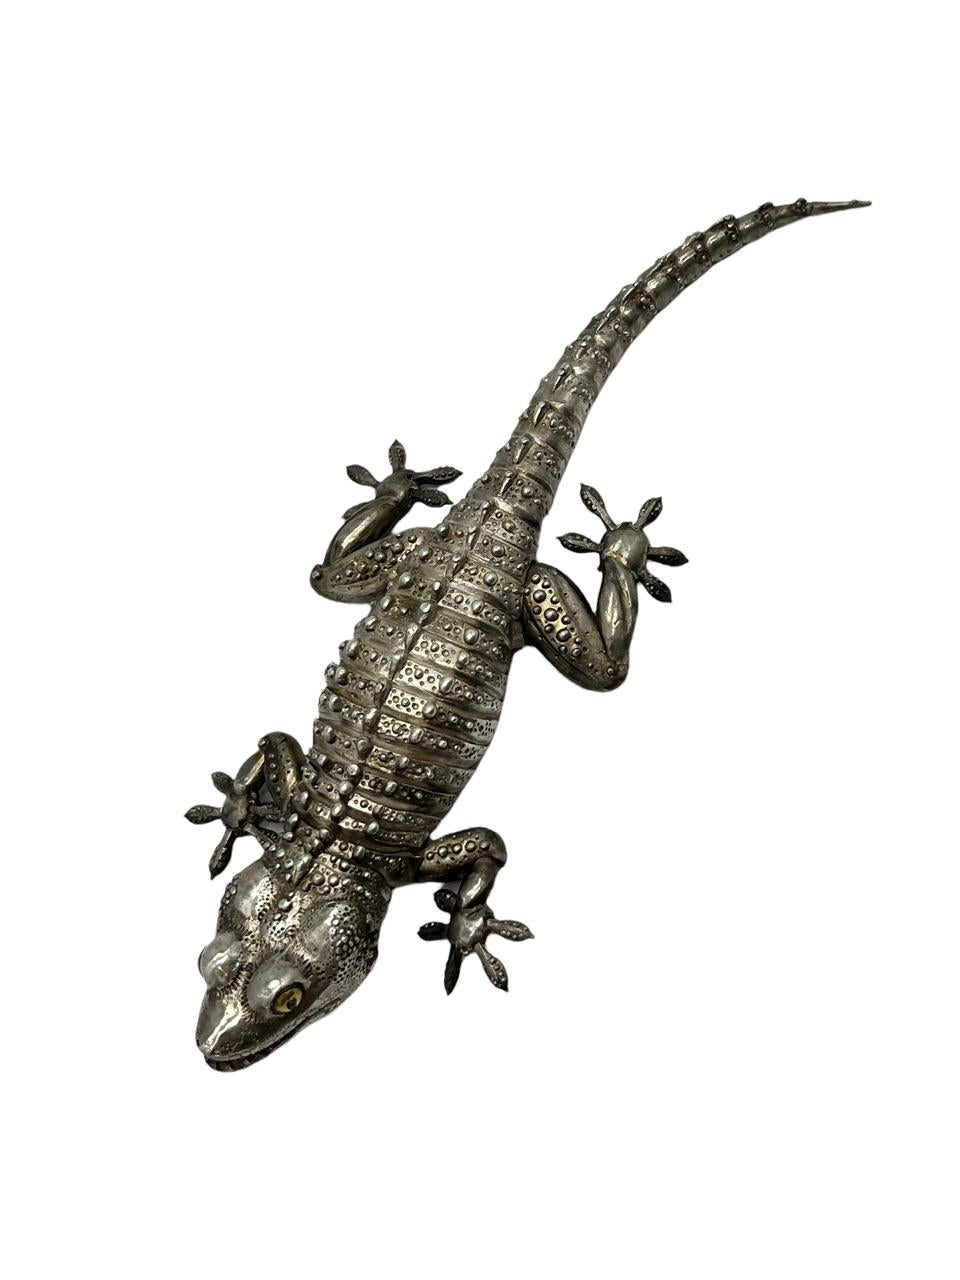 21st century fully articulated gecko made of sterling silver by artist Oleg Konstantinov. It is realistically modeled with gold eyes and articulated body. 
 